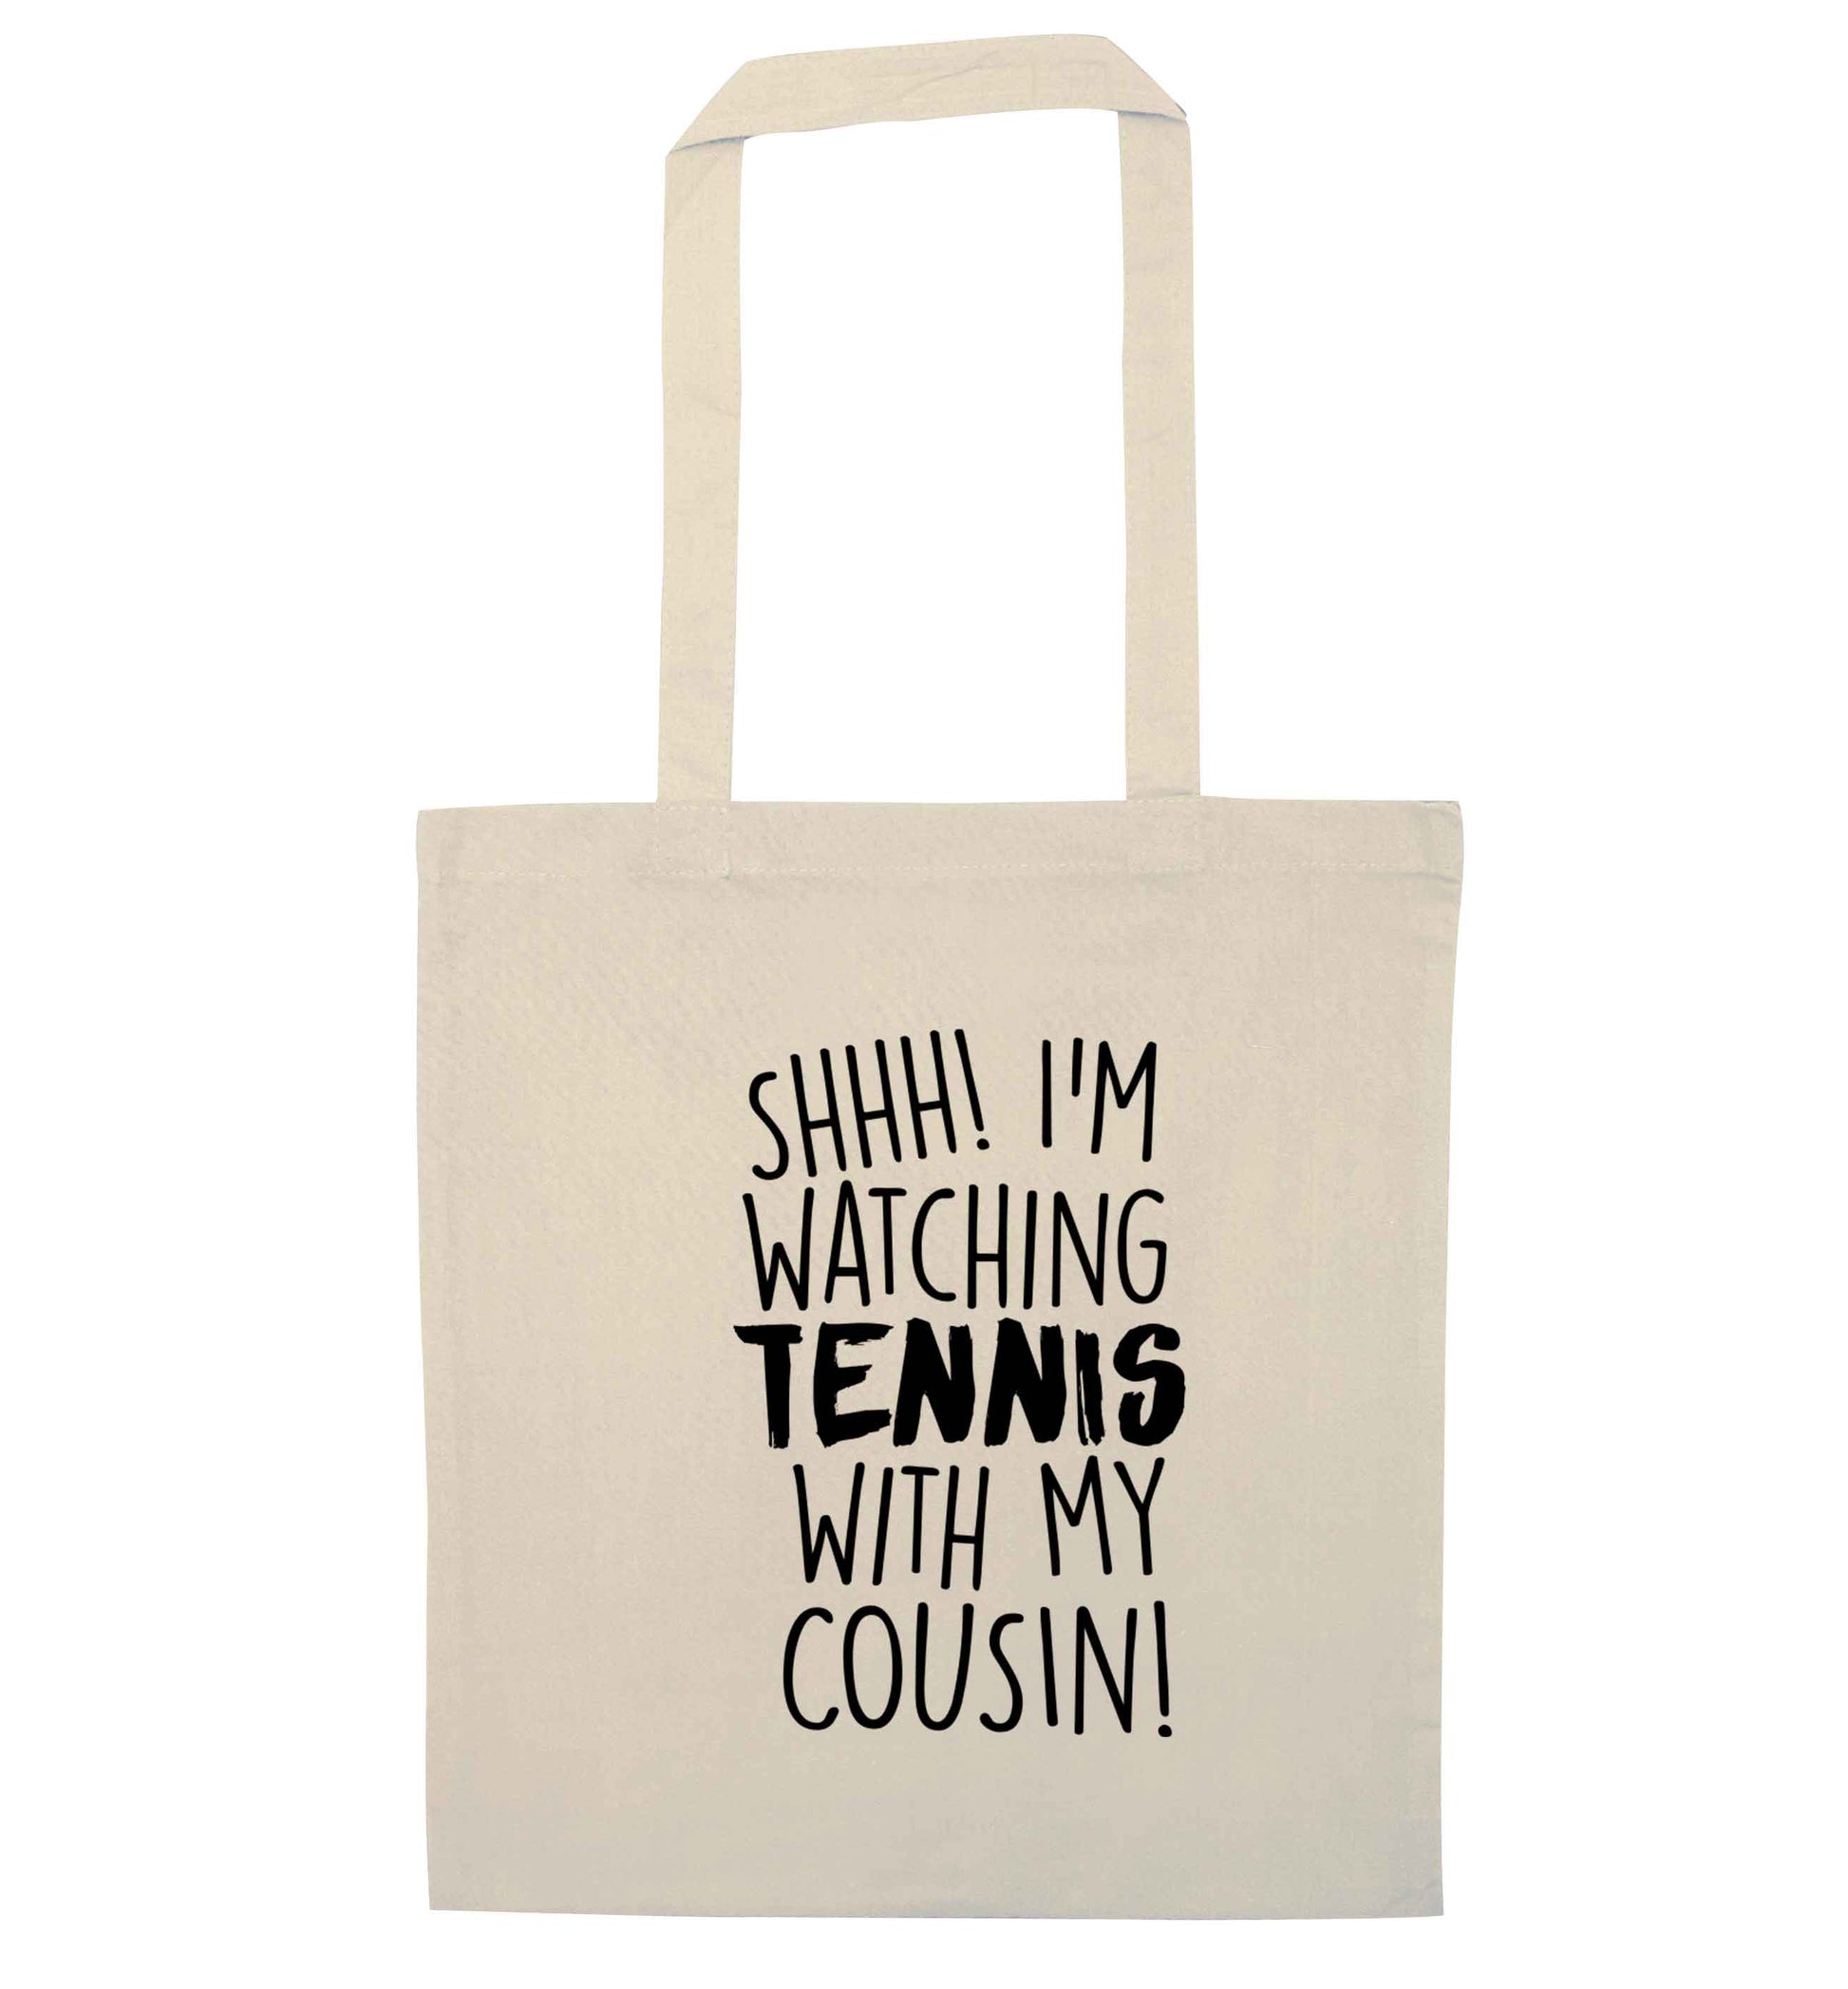 Shh! I'm watching tennis with my cousin! natural tote bag